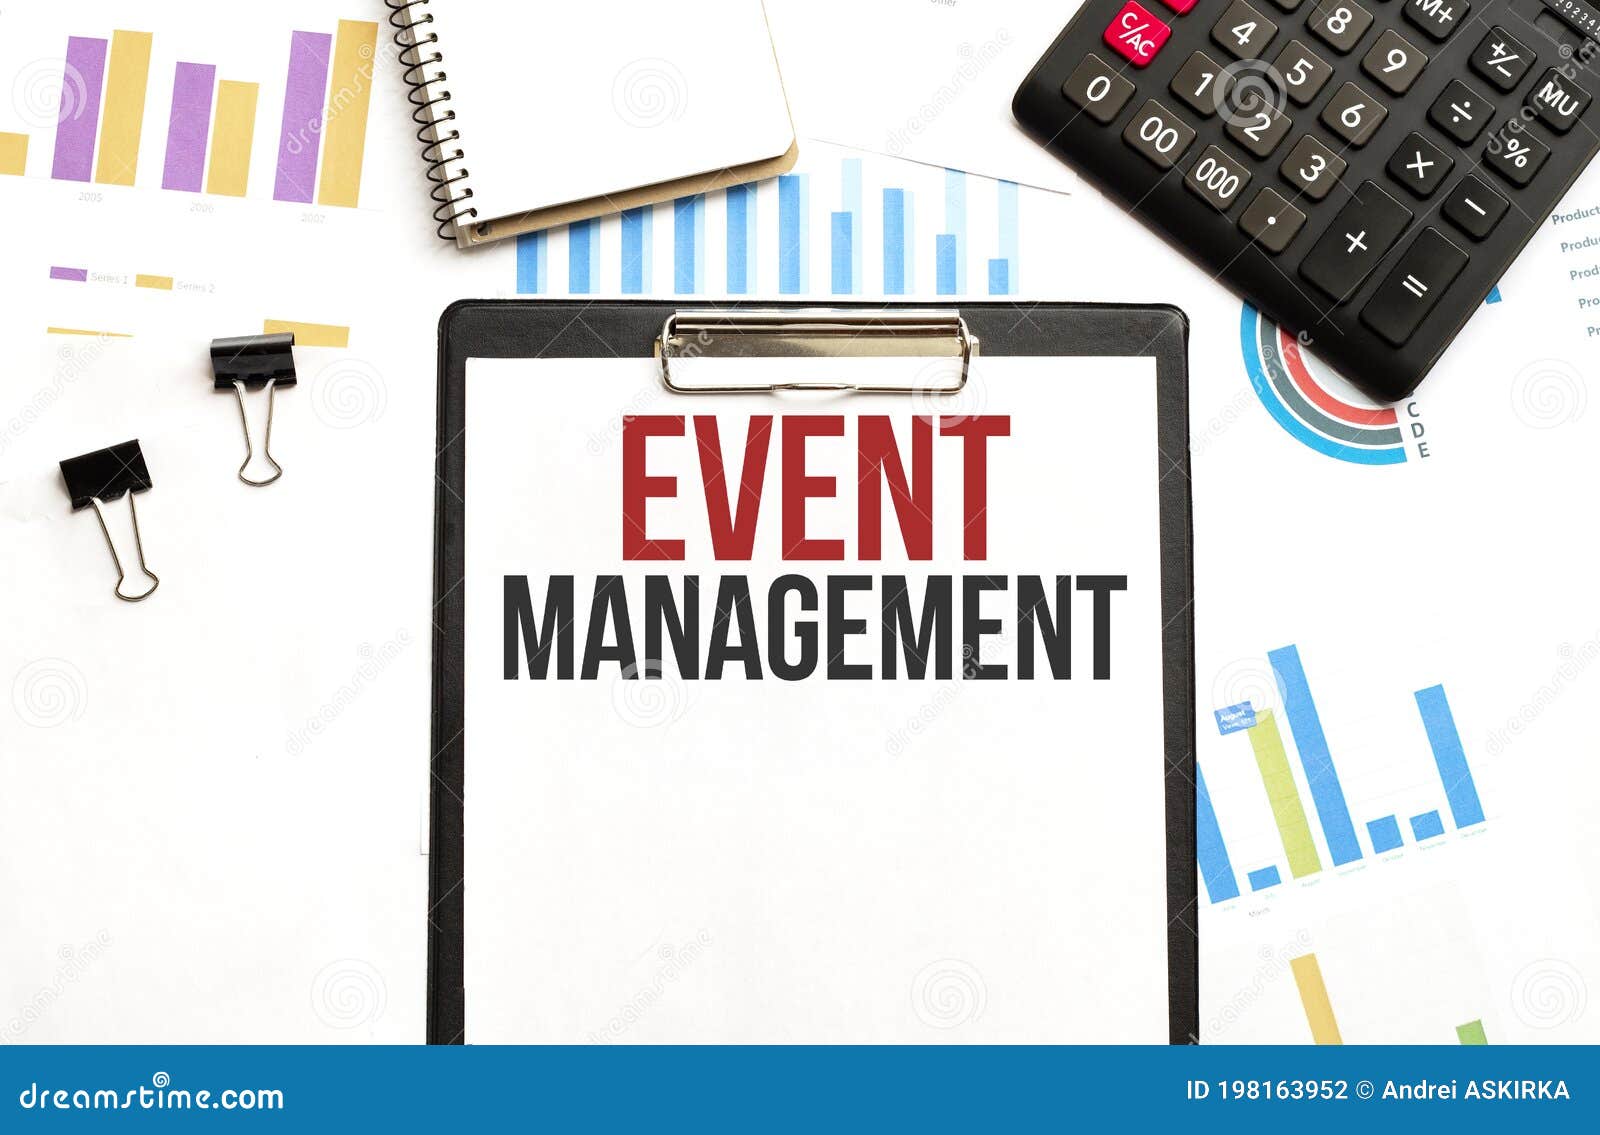 39,206 Event Management Stock Photos - Free & Royalty-Free Stock Photos  from Dreamstime